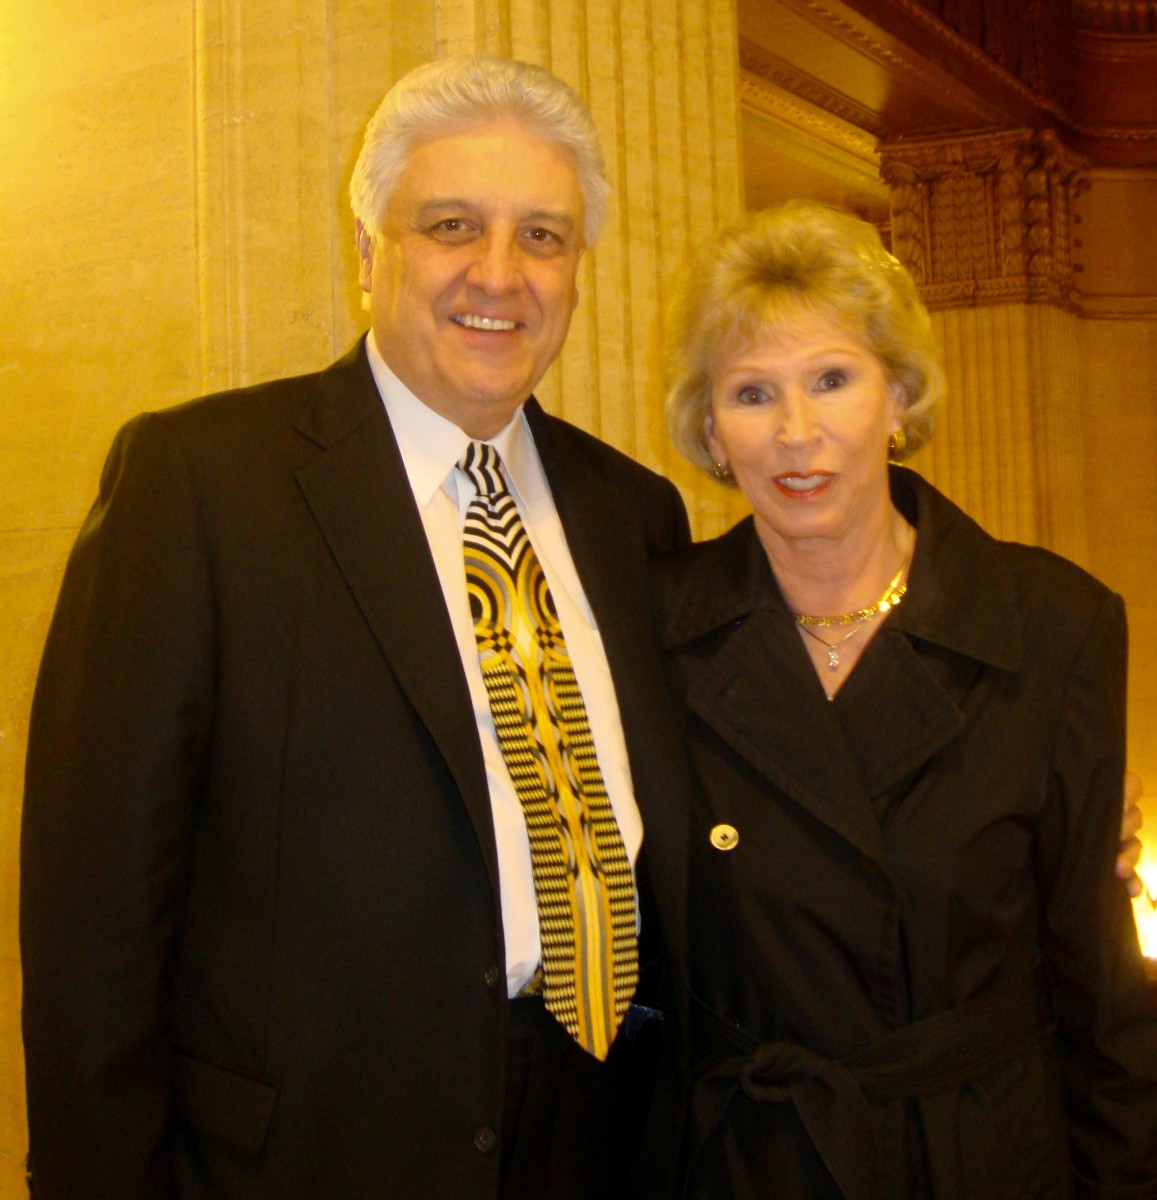 Mark Ullan, founder and CEO of Unique Solutions, and his wife Joyce enjoyed Shen Yun Performing Arts on April 21 at Chicago's Civic Opera House.(Paul Darin/The Epoch Times)